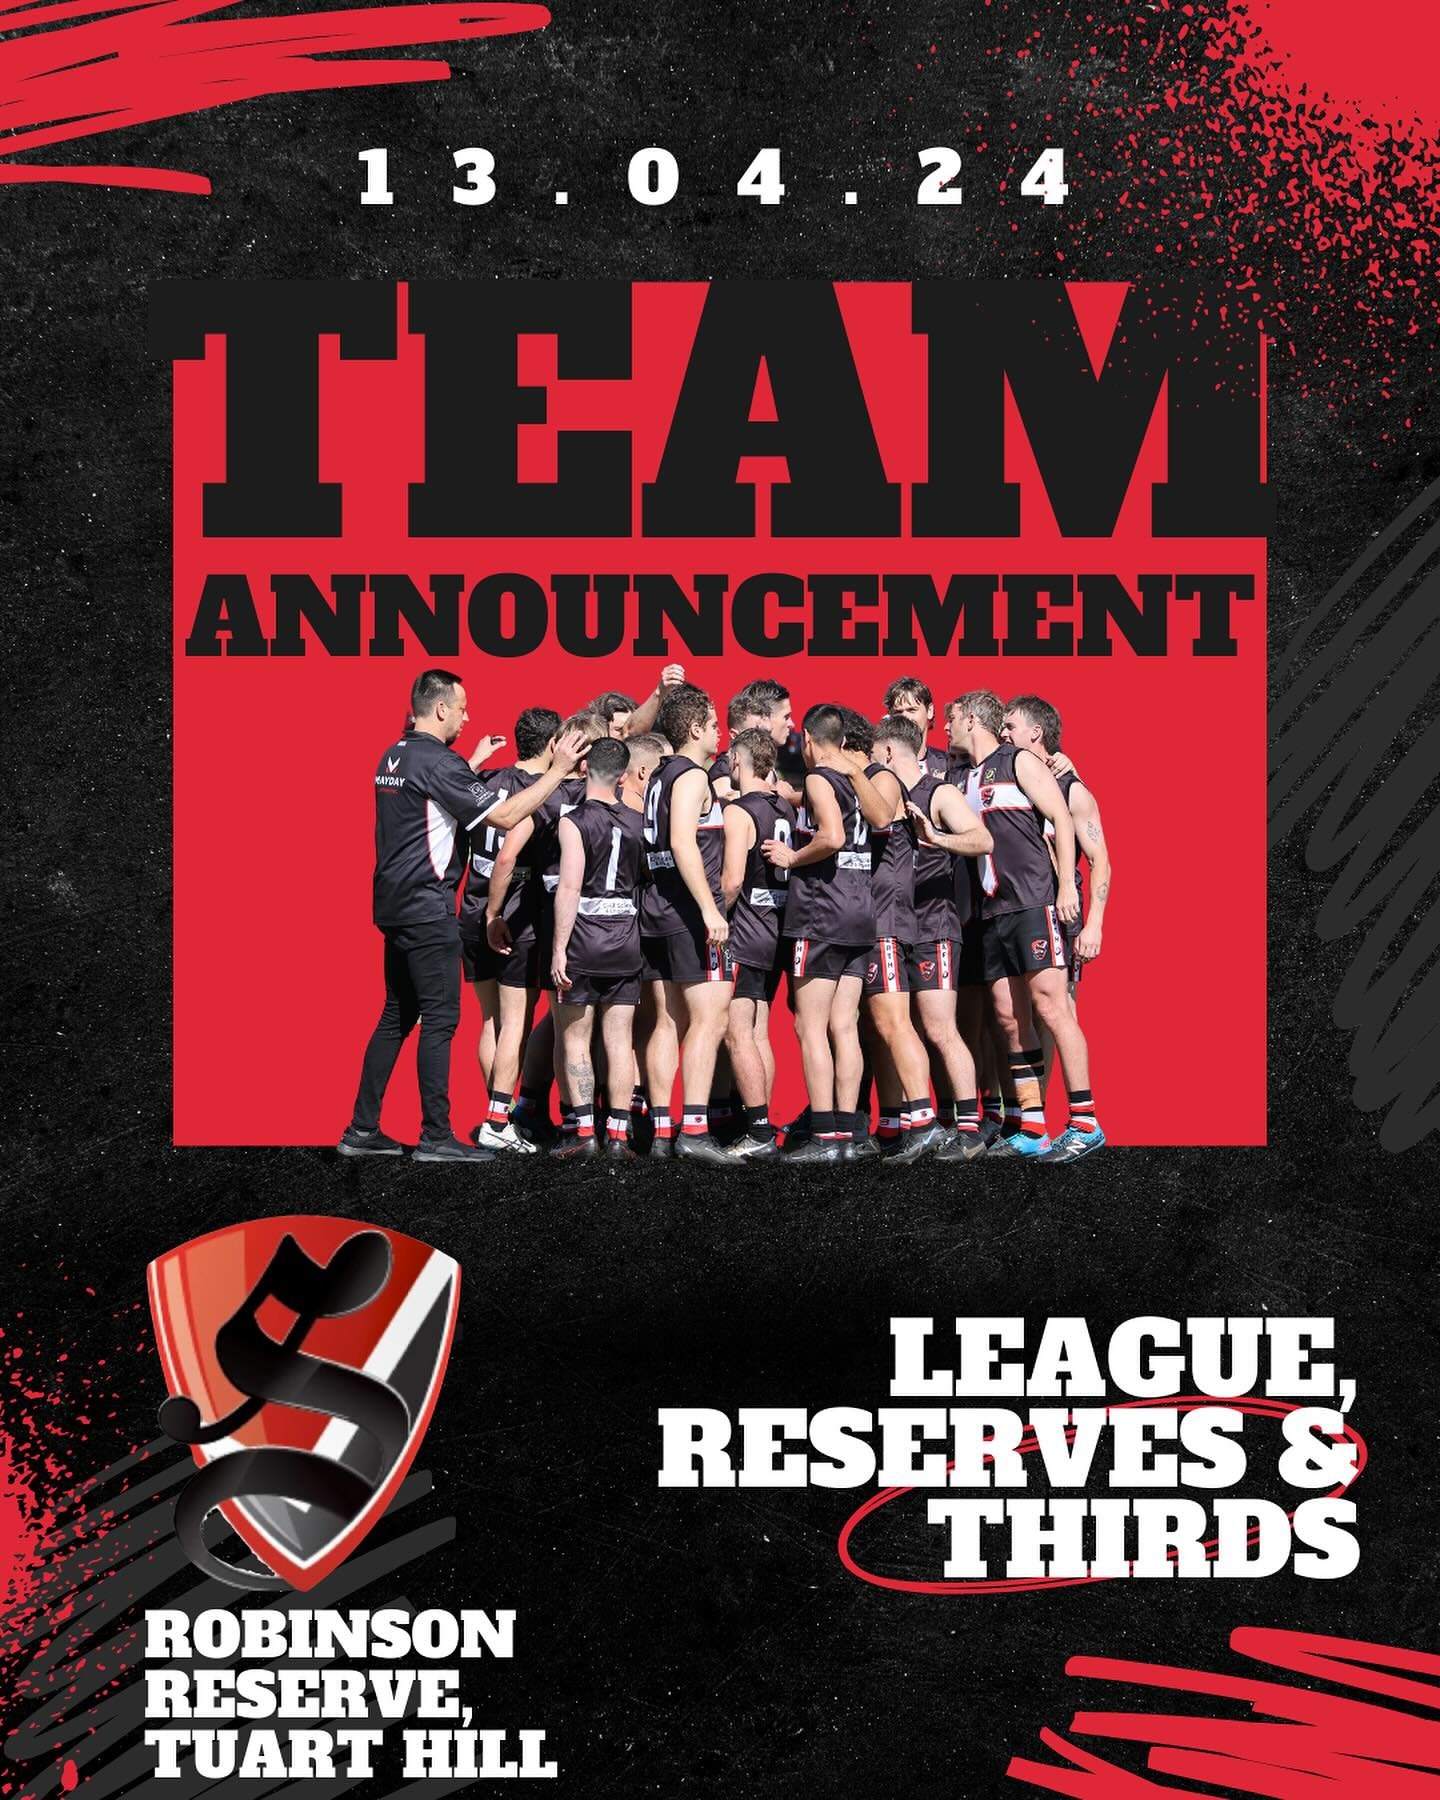 A massive Saturday coming up. With the first triple header of season 2024. League, Reserves and the Thirds will play their first home games of the year. 

League, Reserves and Thirds teams have been announced for their respective matches on the weeke